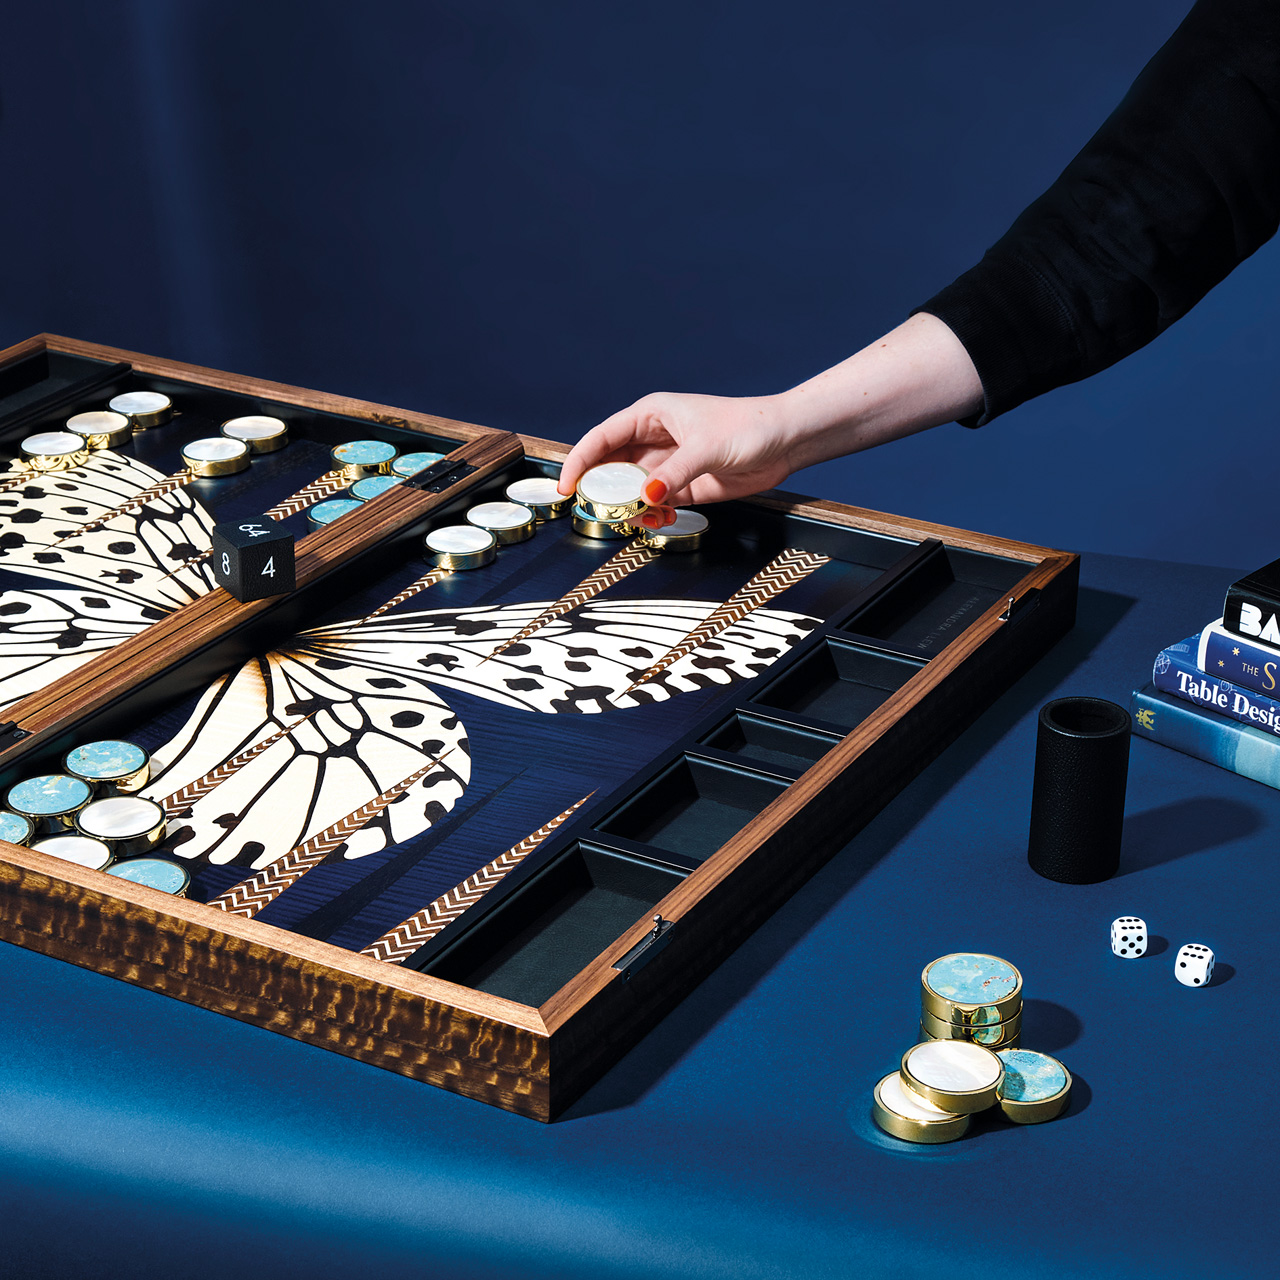 A hand reaching to a board game with a butterfly on it